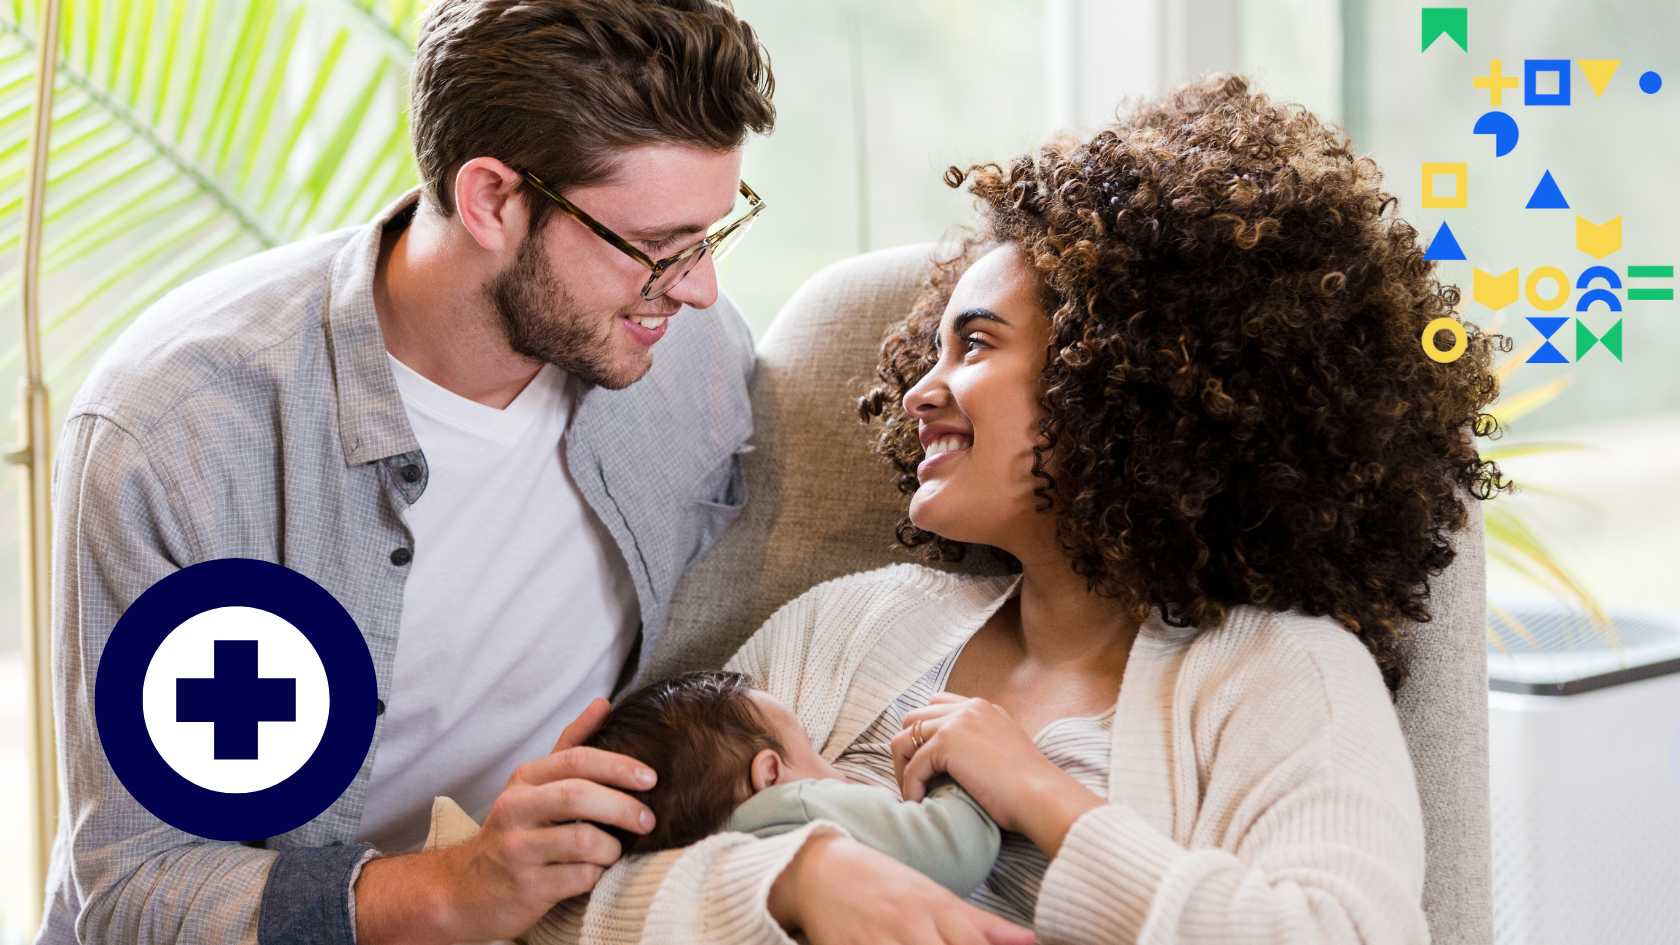 Image of a mom and dad smiling and looking at one another while the mother holds the baby, with a plus sign health icon overlaid, representing parental leave.